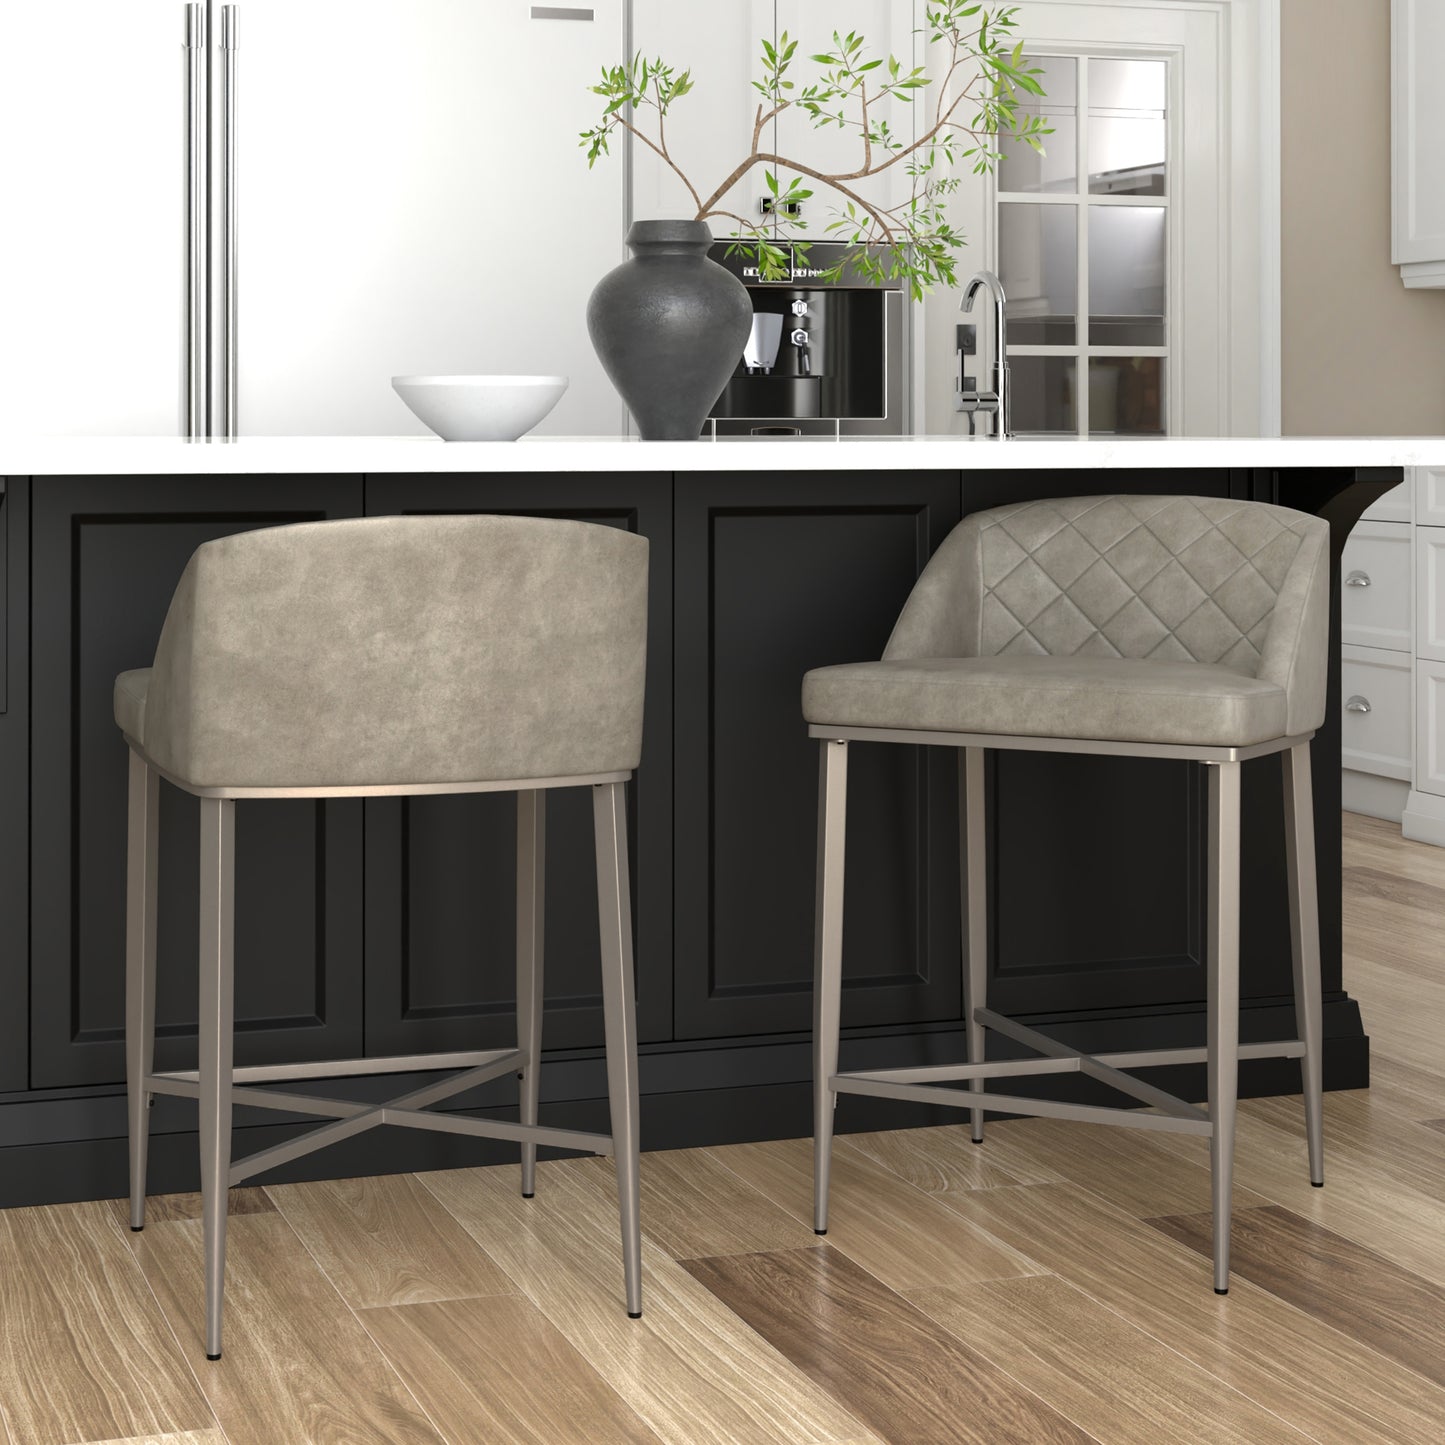 Hillsdale Furniture Phoenix Metal Counter Height Stool, Set of 2, Pewter